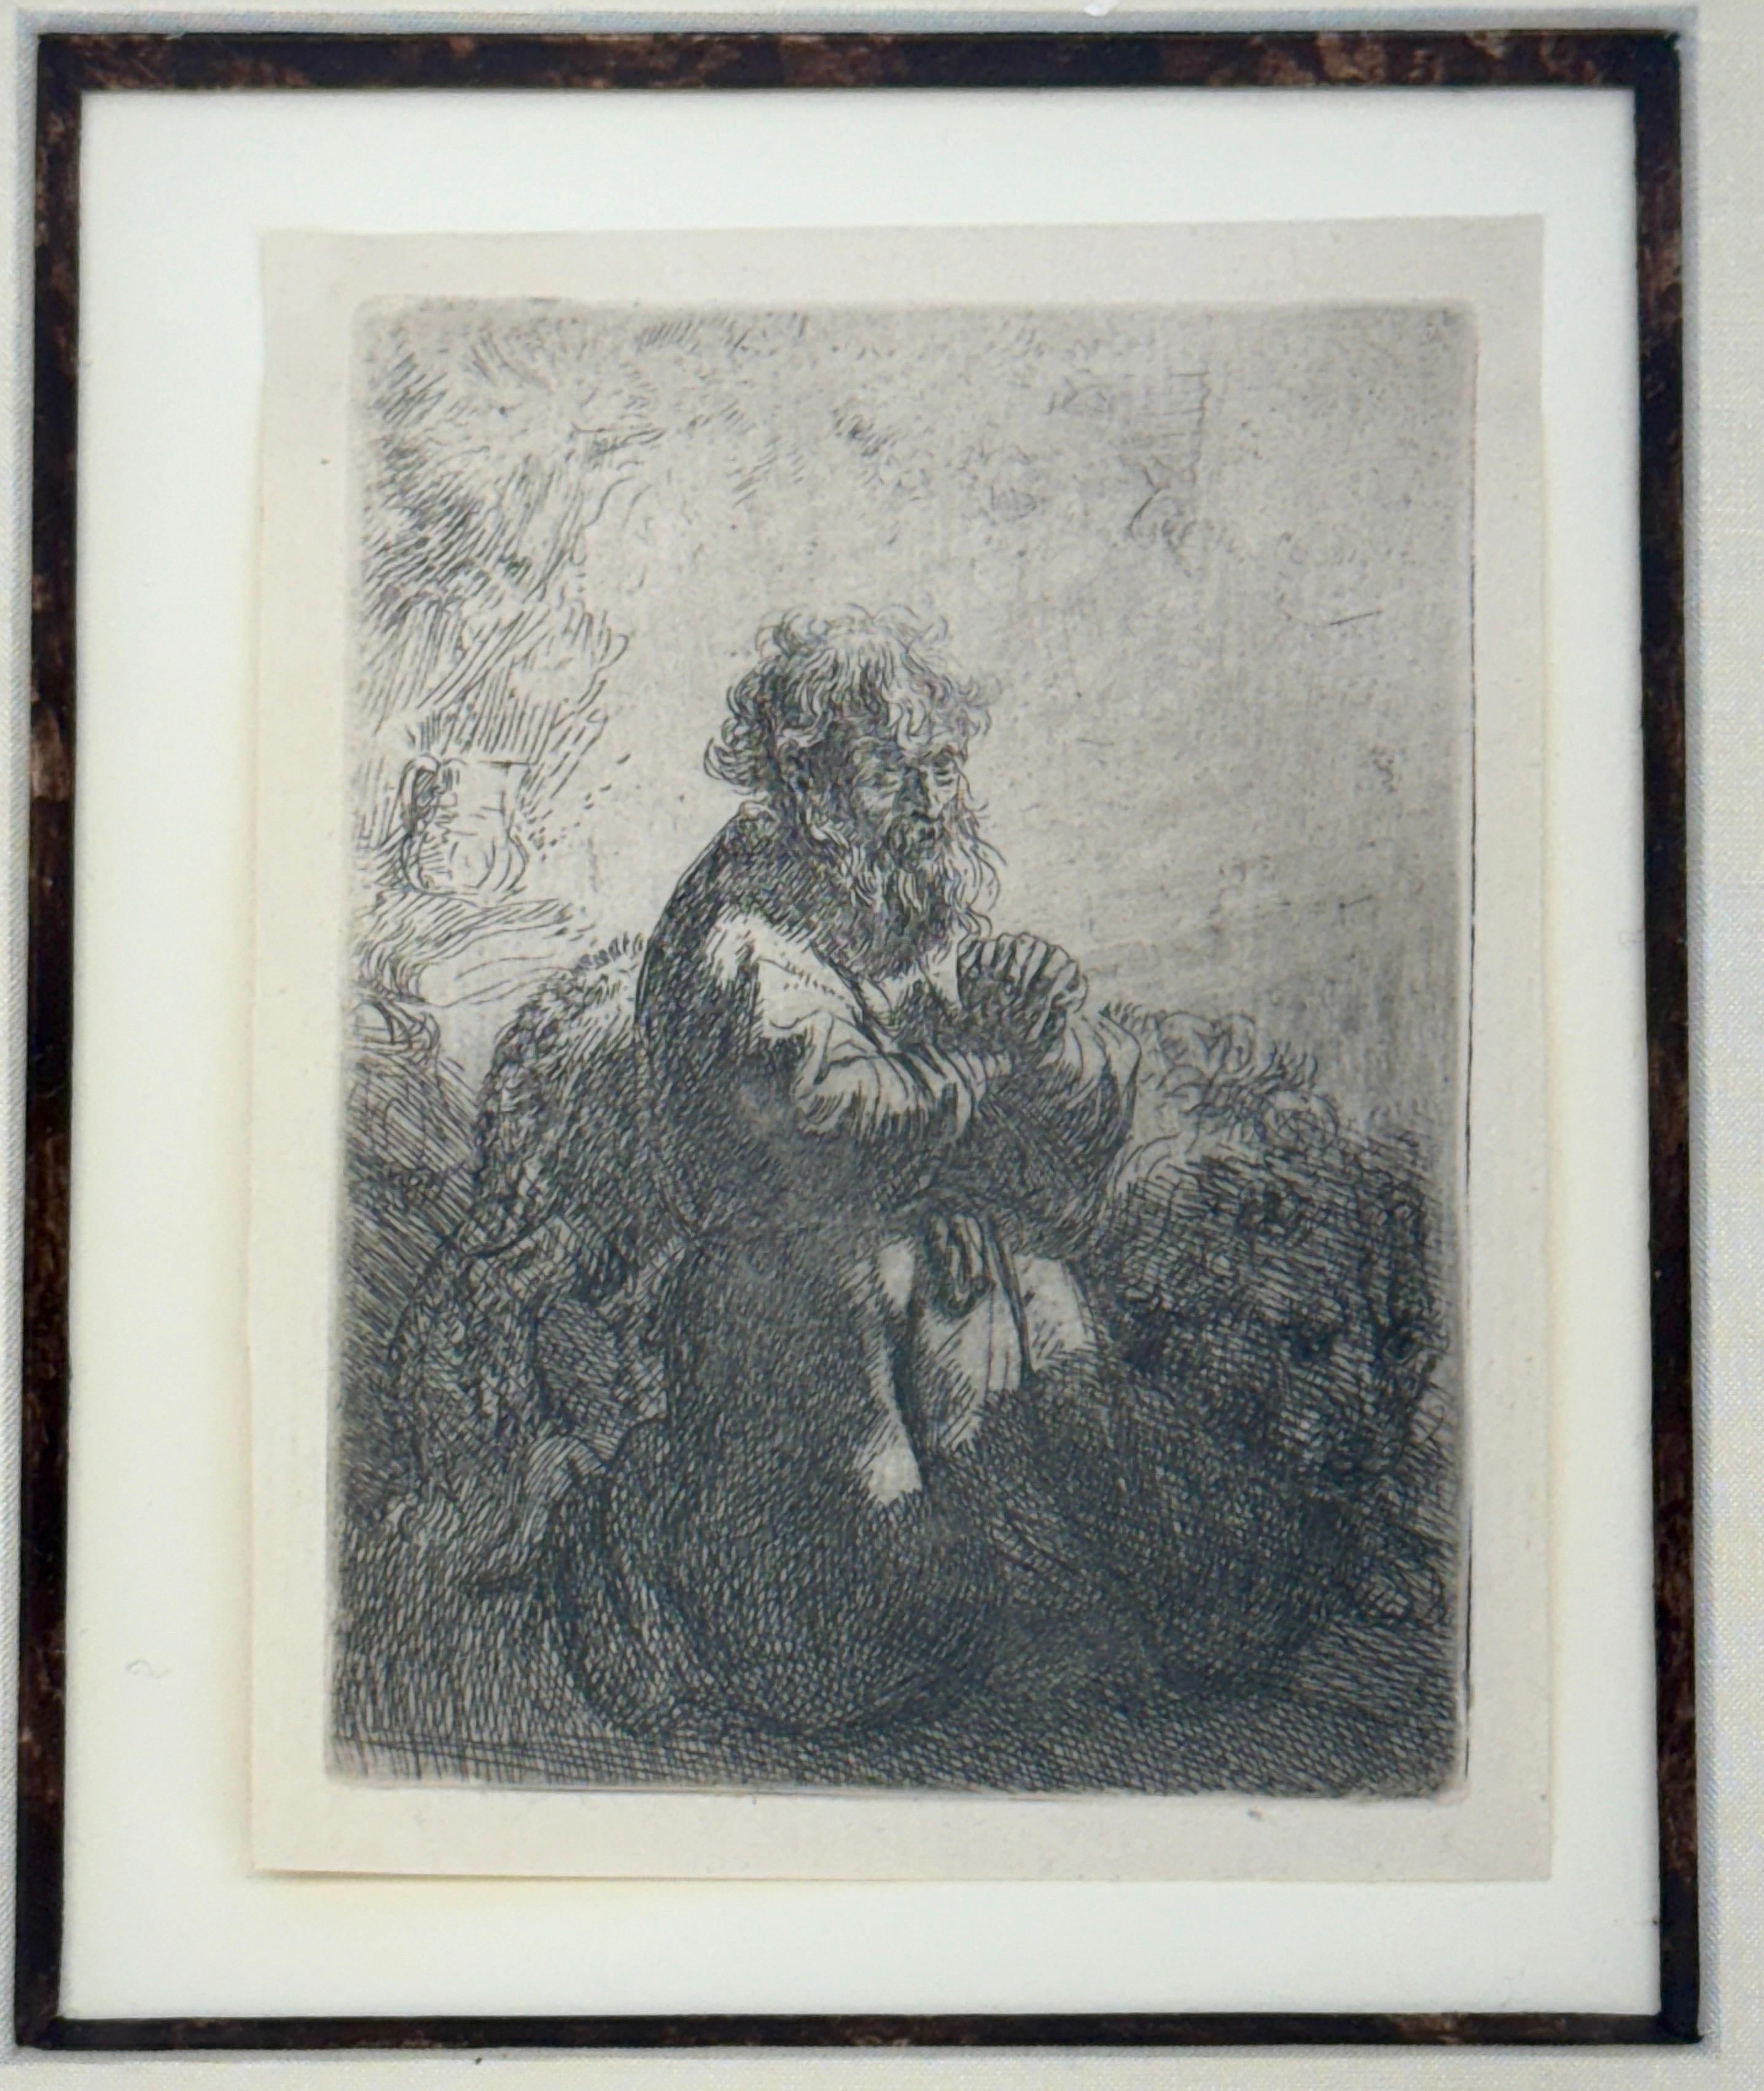 St. Jerome Kneeling in Prayer, Looking Down Signed Etching on Paper

Classic Rembrandt Harmenszoon van Rijn framed etching signed and dated in plate. St. Jerome was one of the early church fathers who lived around the fourth century A.D.
In this